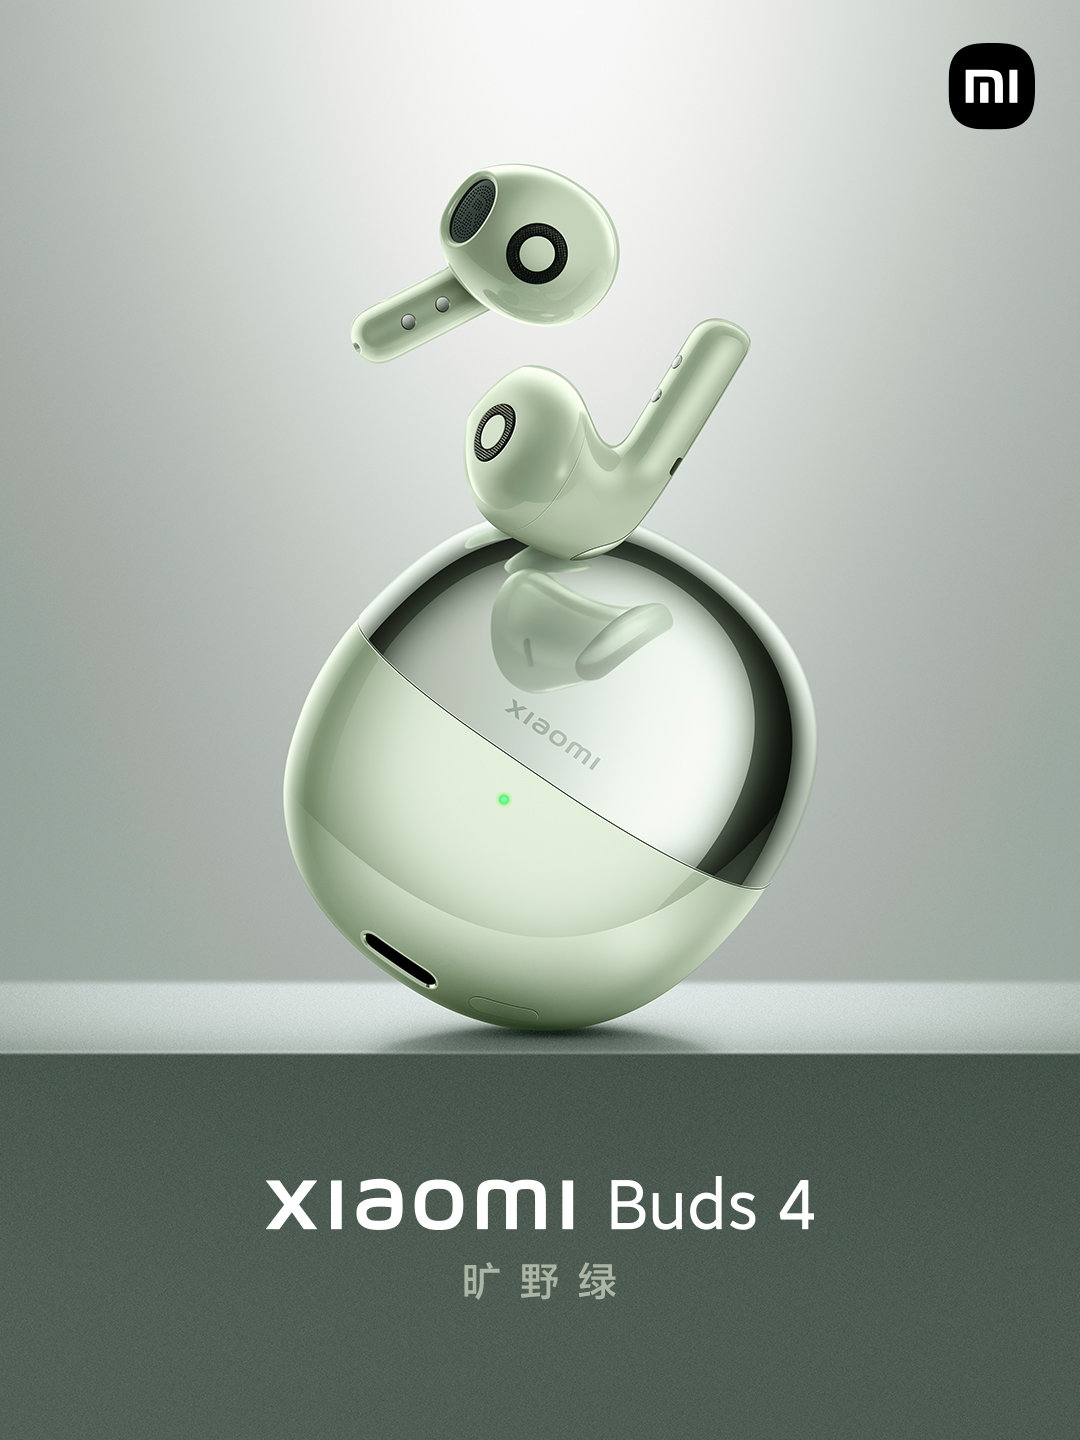 xioami buds 4 poster